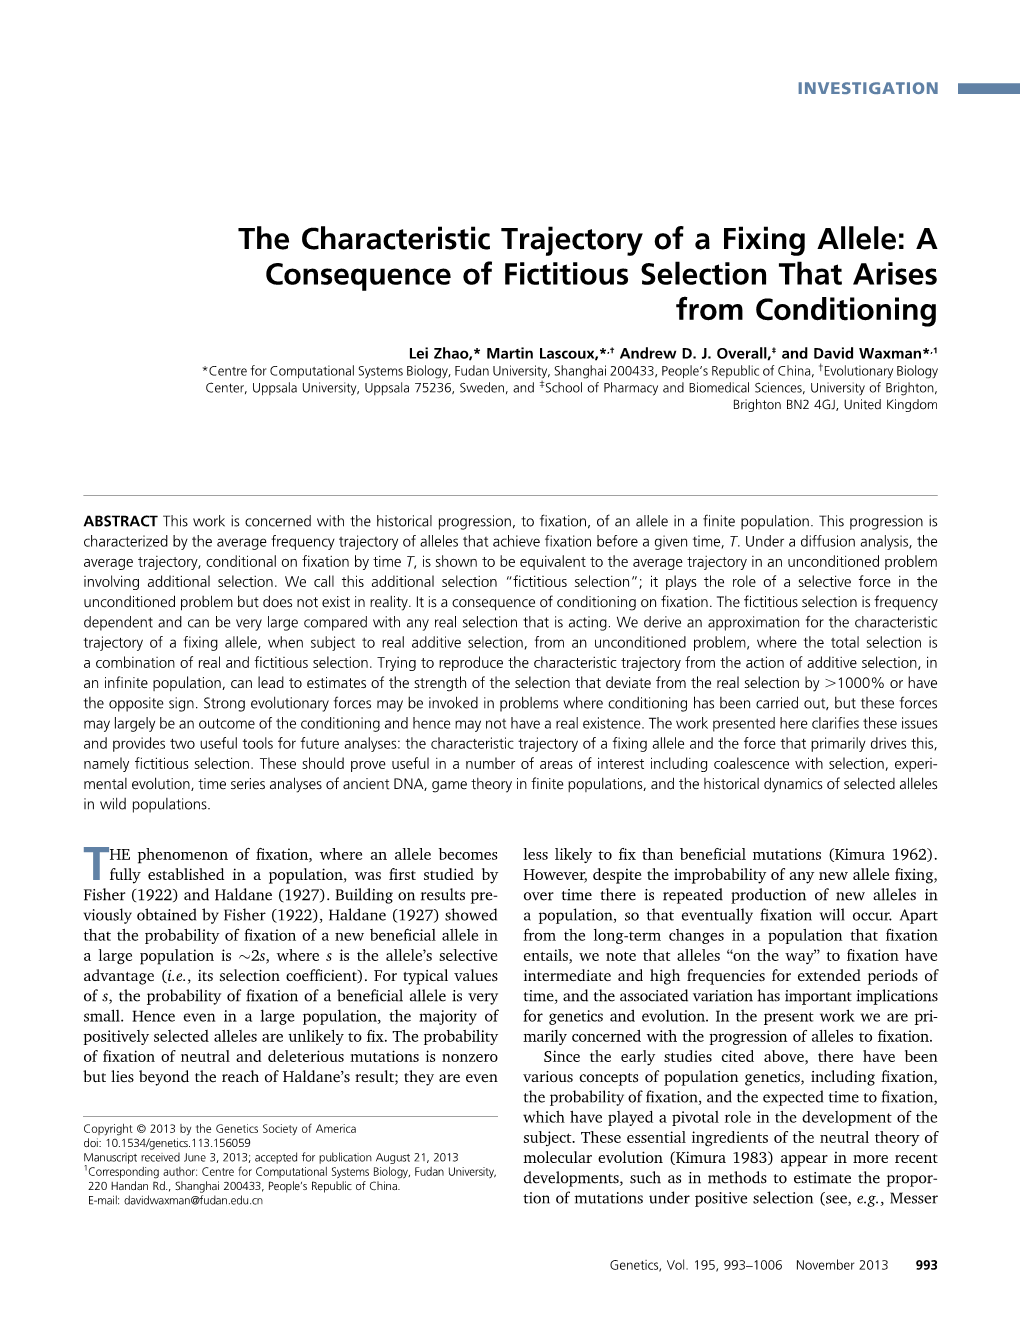 The Characteristic Trajectory of a Fixing Allele: a Consequence of Fictitious Selection That Arises from Conditioning